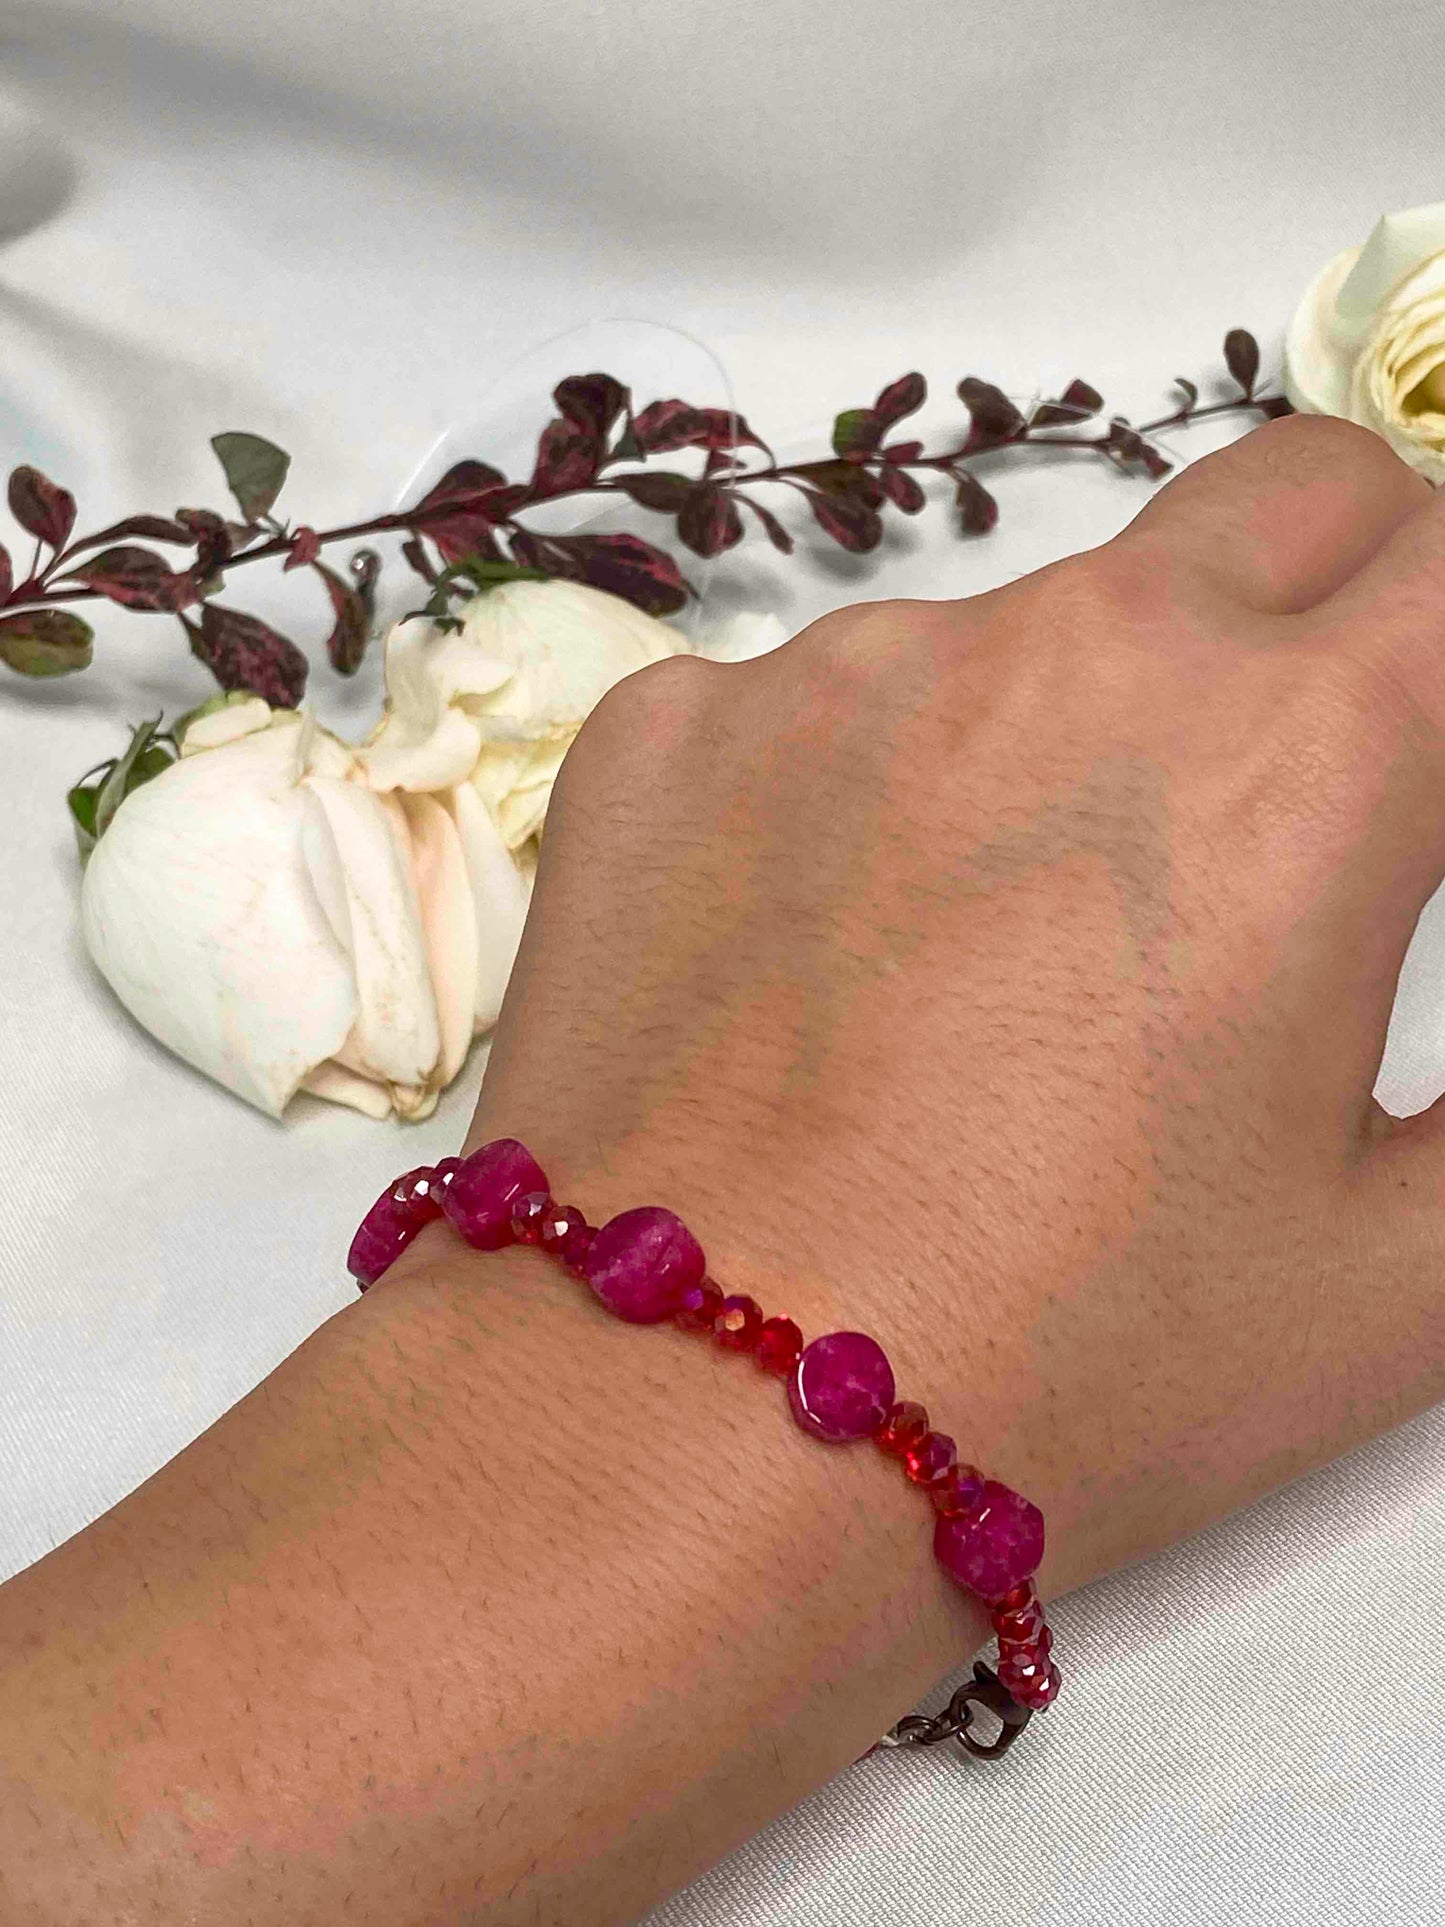 A handmade red crystal bead and pink rubellite stone bracelet.